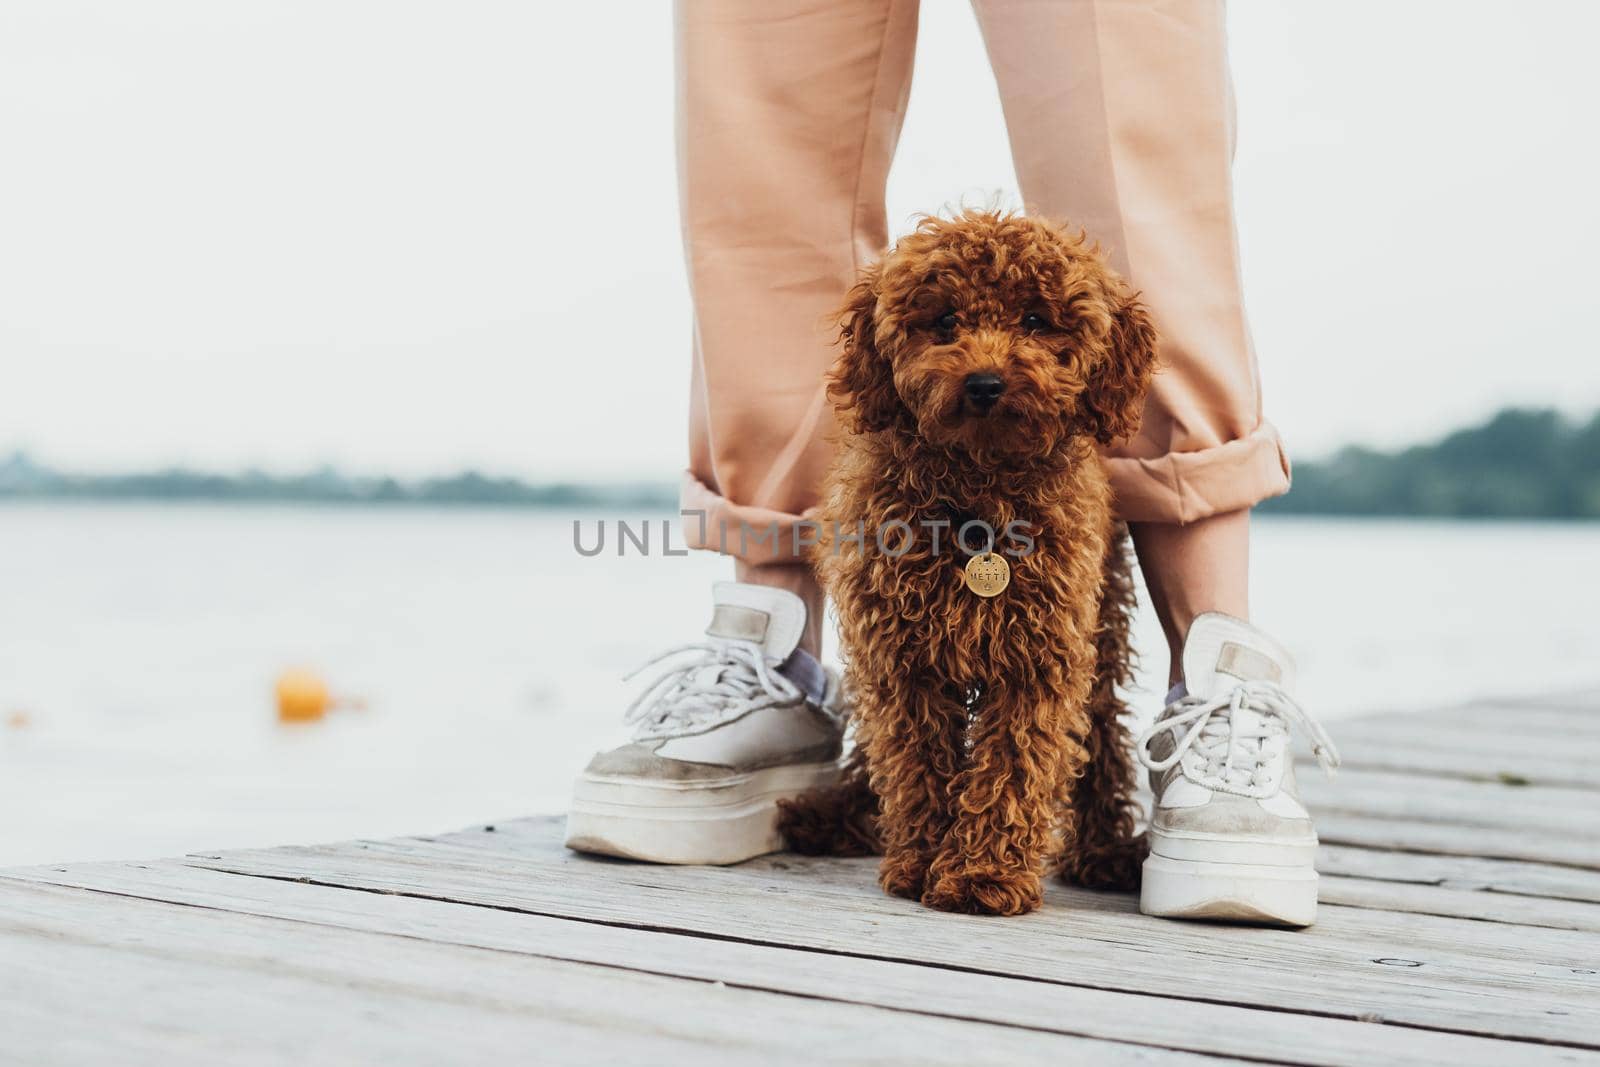 Cute little toy poodle called Metti standing on pier next to owner's legs